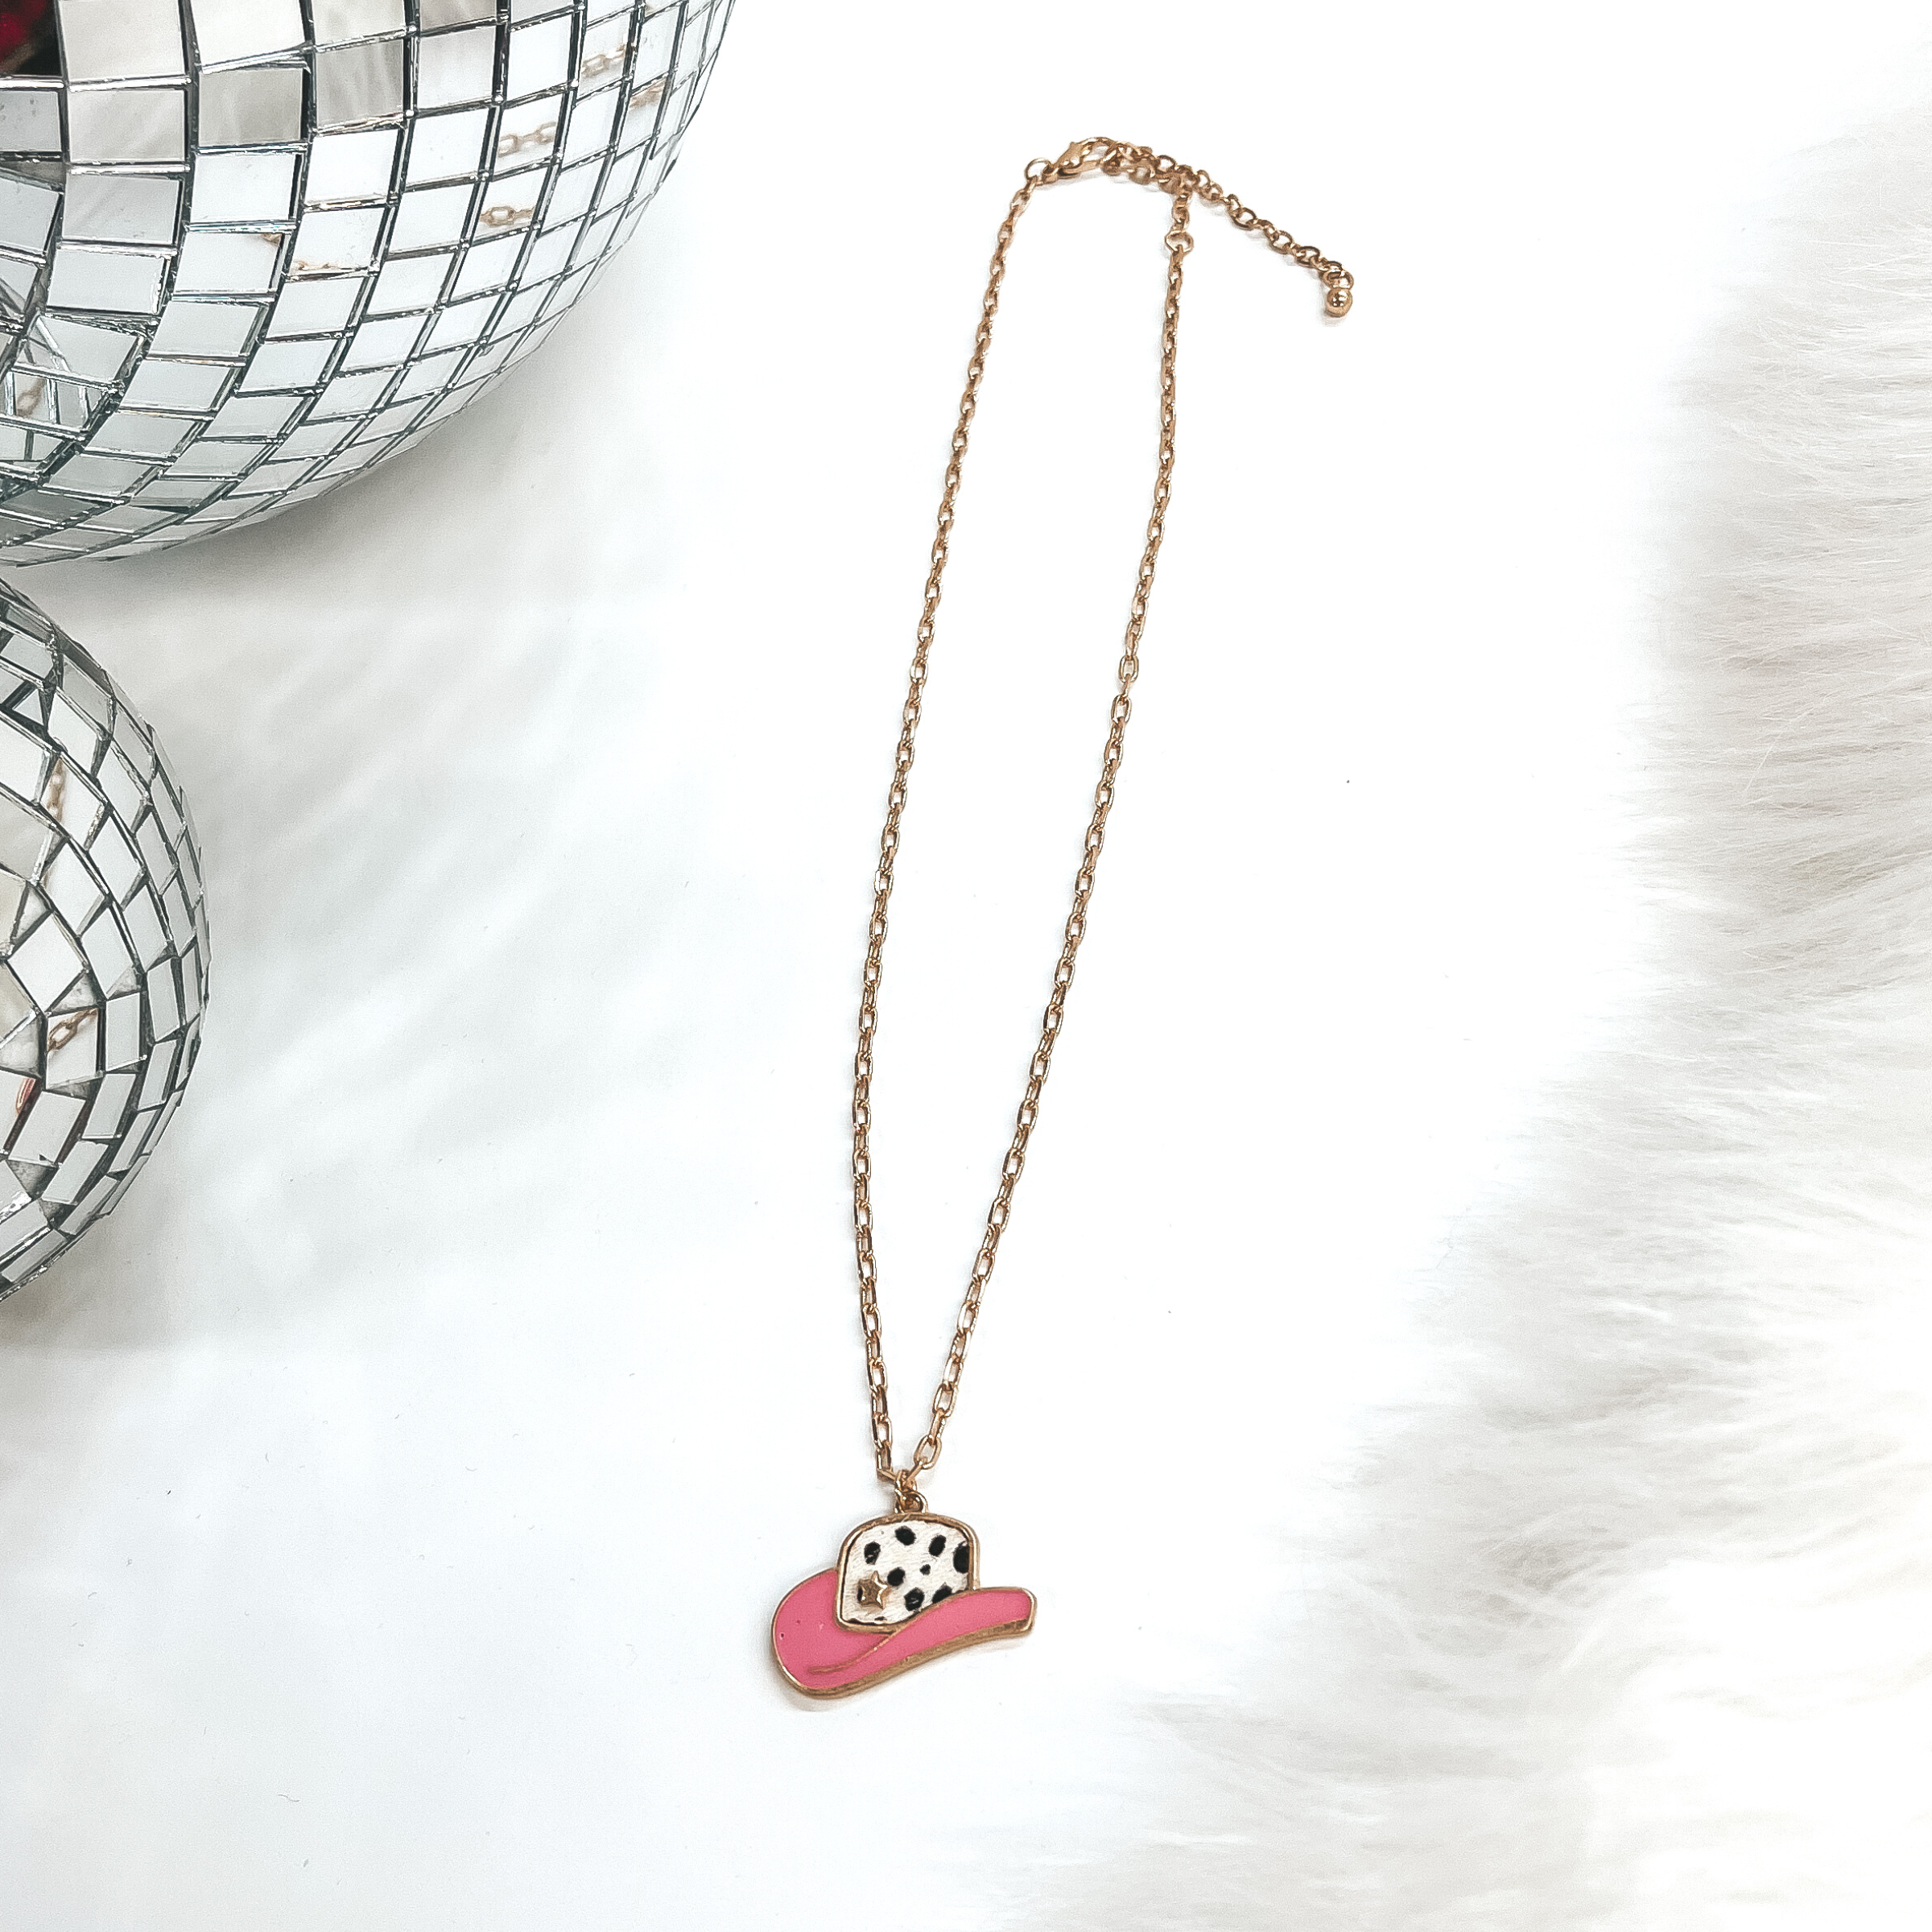 This is a gold chain necklace with a hat pendant in  a gold setting. The hat pendant is pink and has  a dotted print with a gold star. This necklace is  taken on laying on a white background with a white  fur carpet in the side and two disco ball as decor.